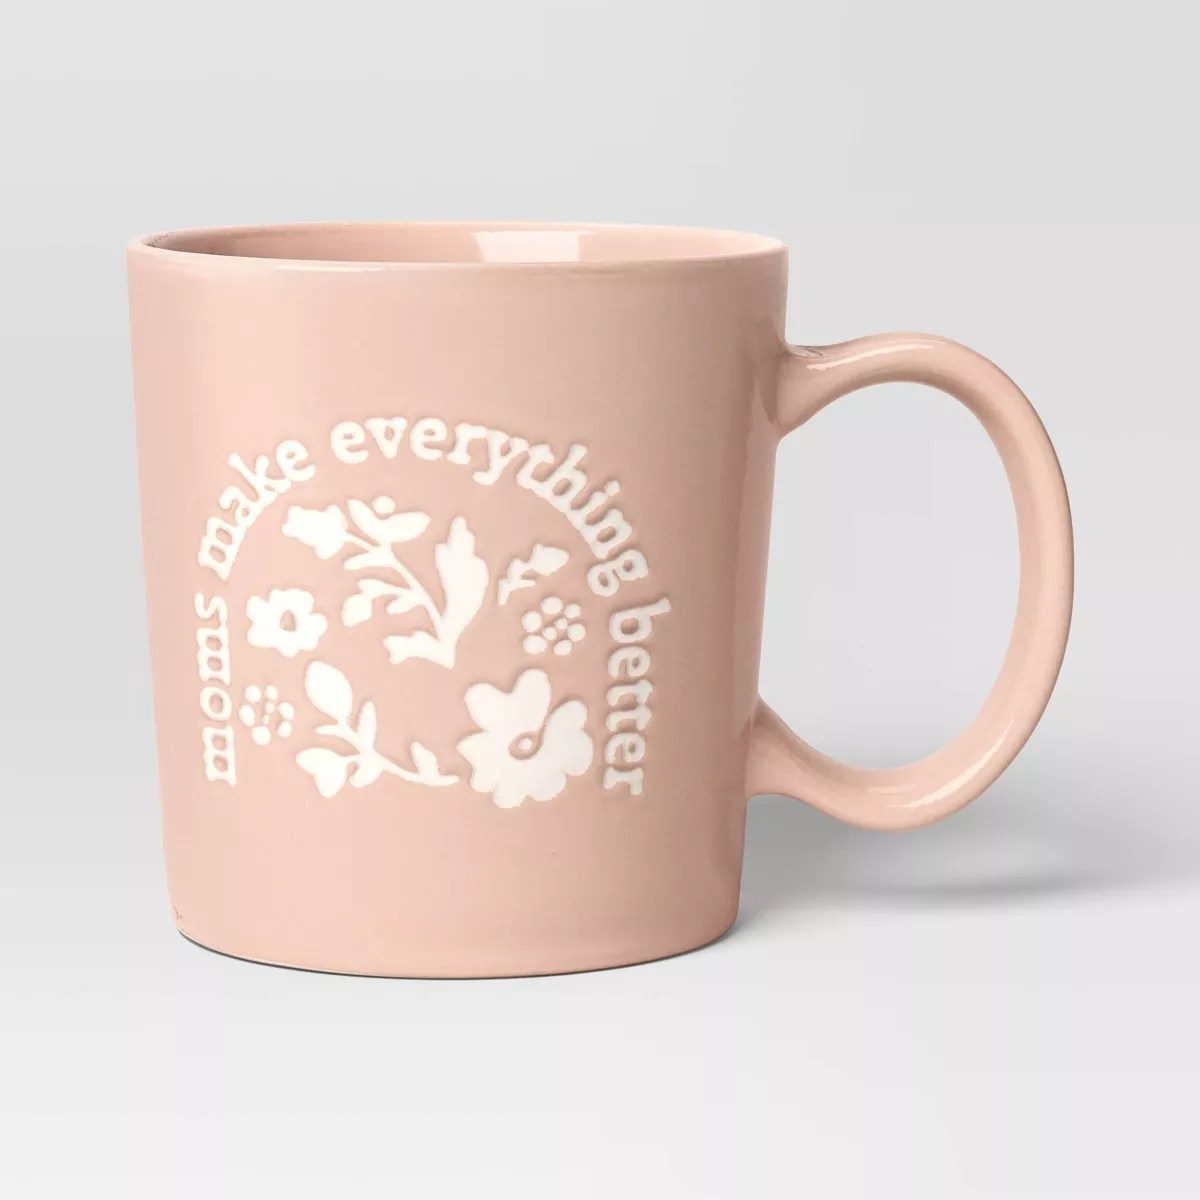 moms make everything better mug, a great mother's day food gift